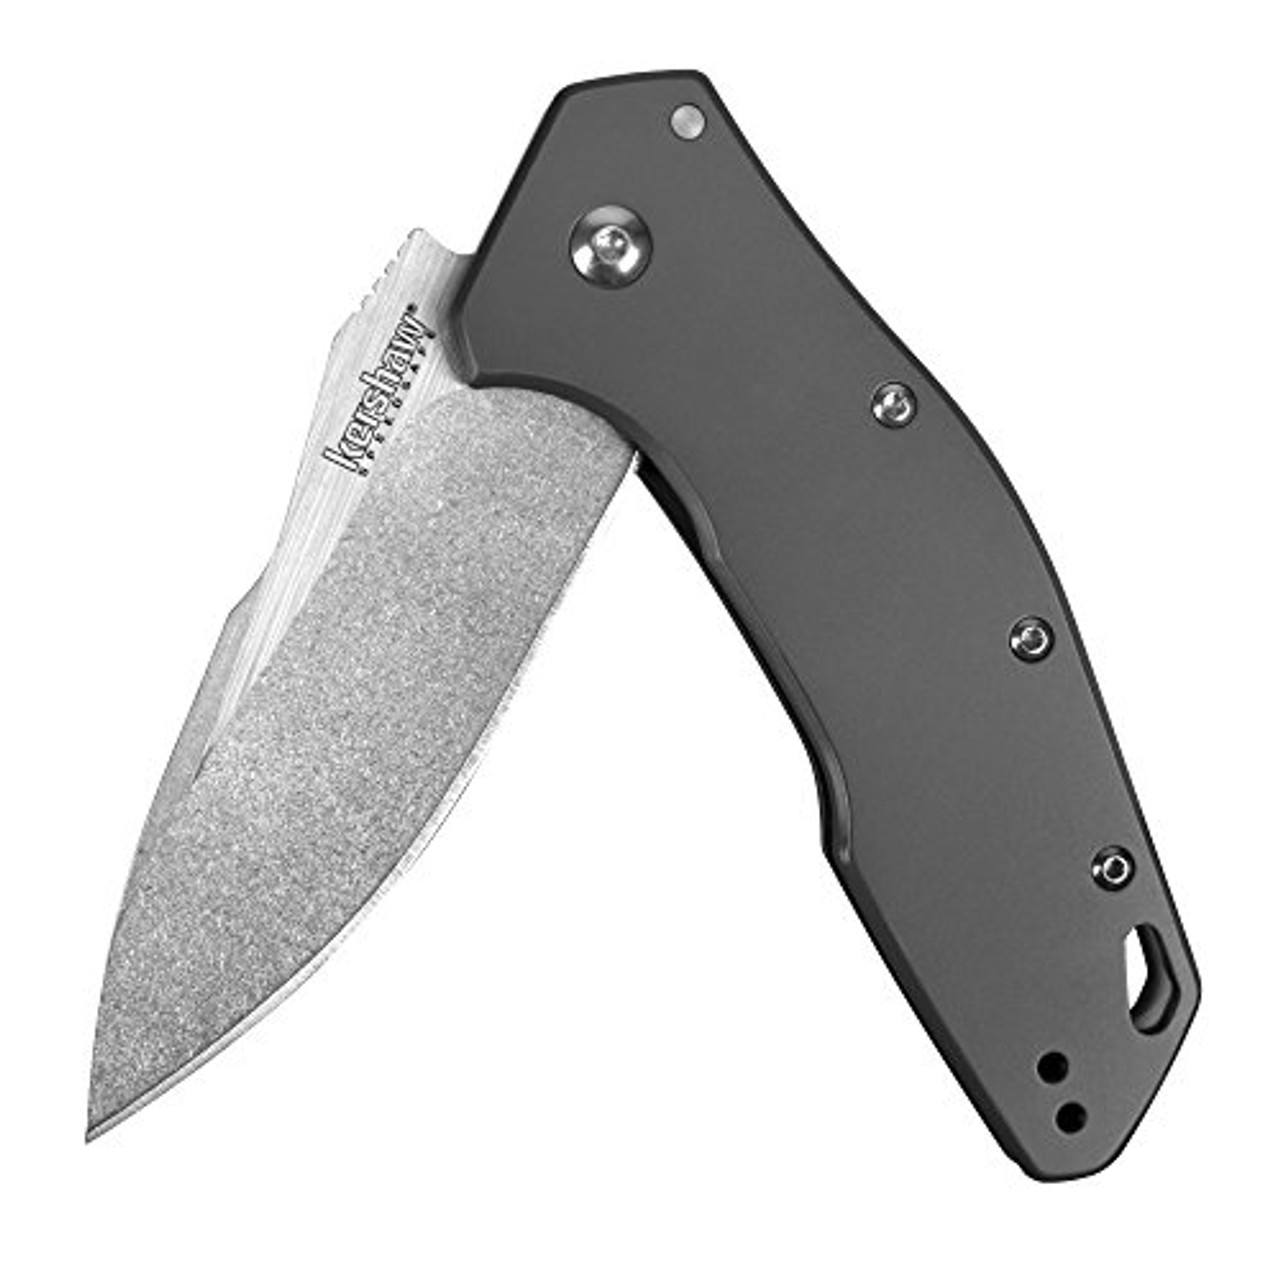  Kershaw Cryo Knife, 2.75 Stainless Steel Drop Point